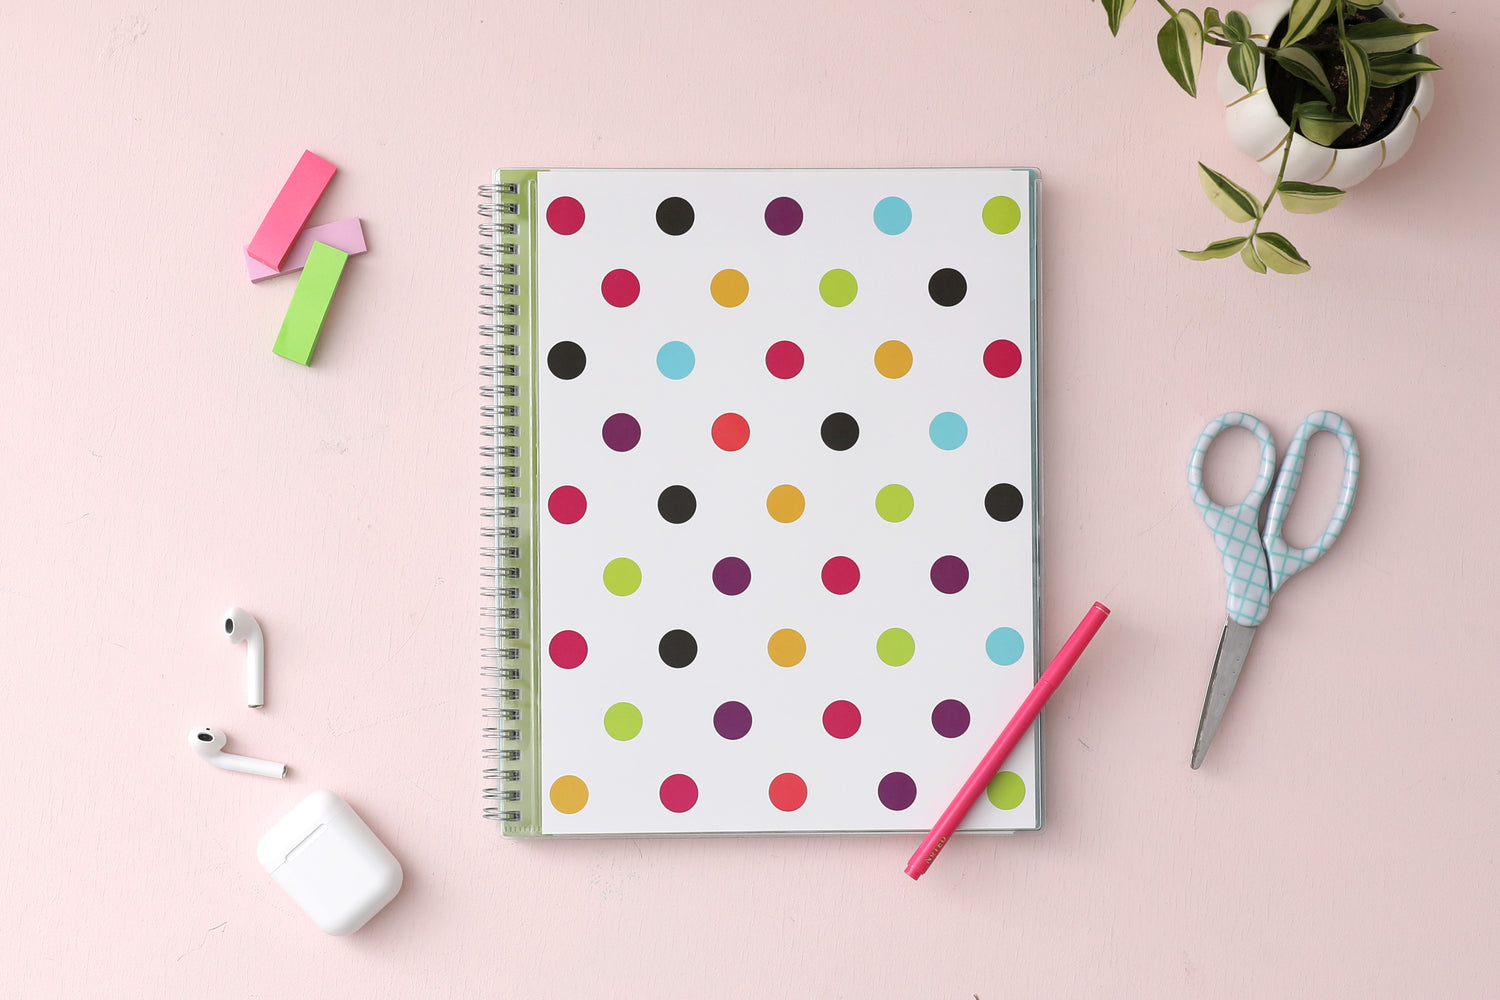 academic teacher lesson planner purple, gold, black, green, and blue dots in 8.5x11 planner size for 2024-2025 academic year. lifestyle photo has pink background, airpods, pink pen, post-its, scissor, and plant.